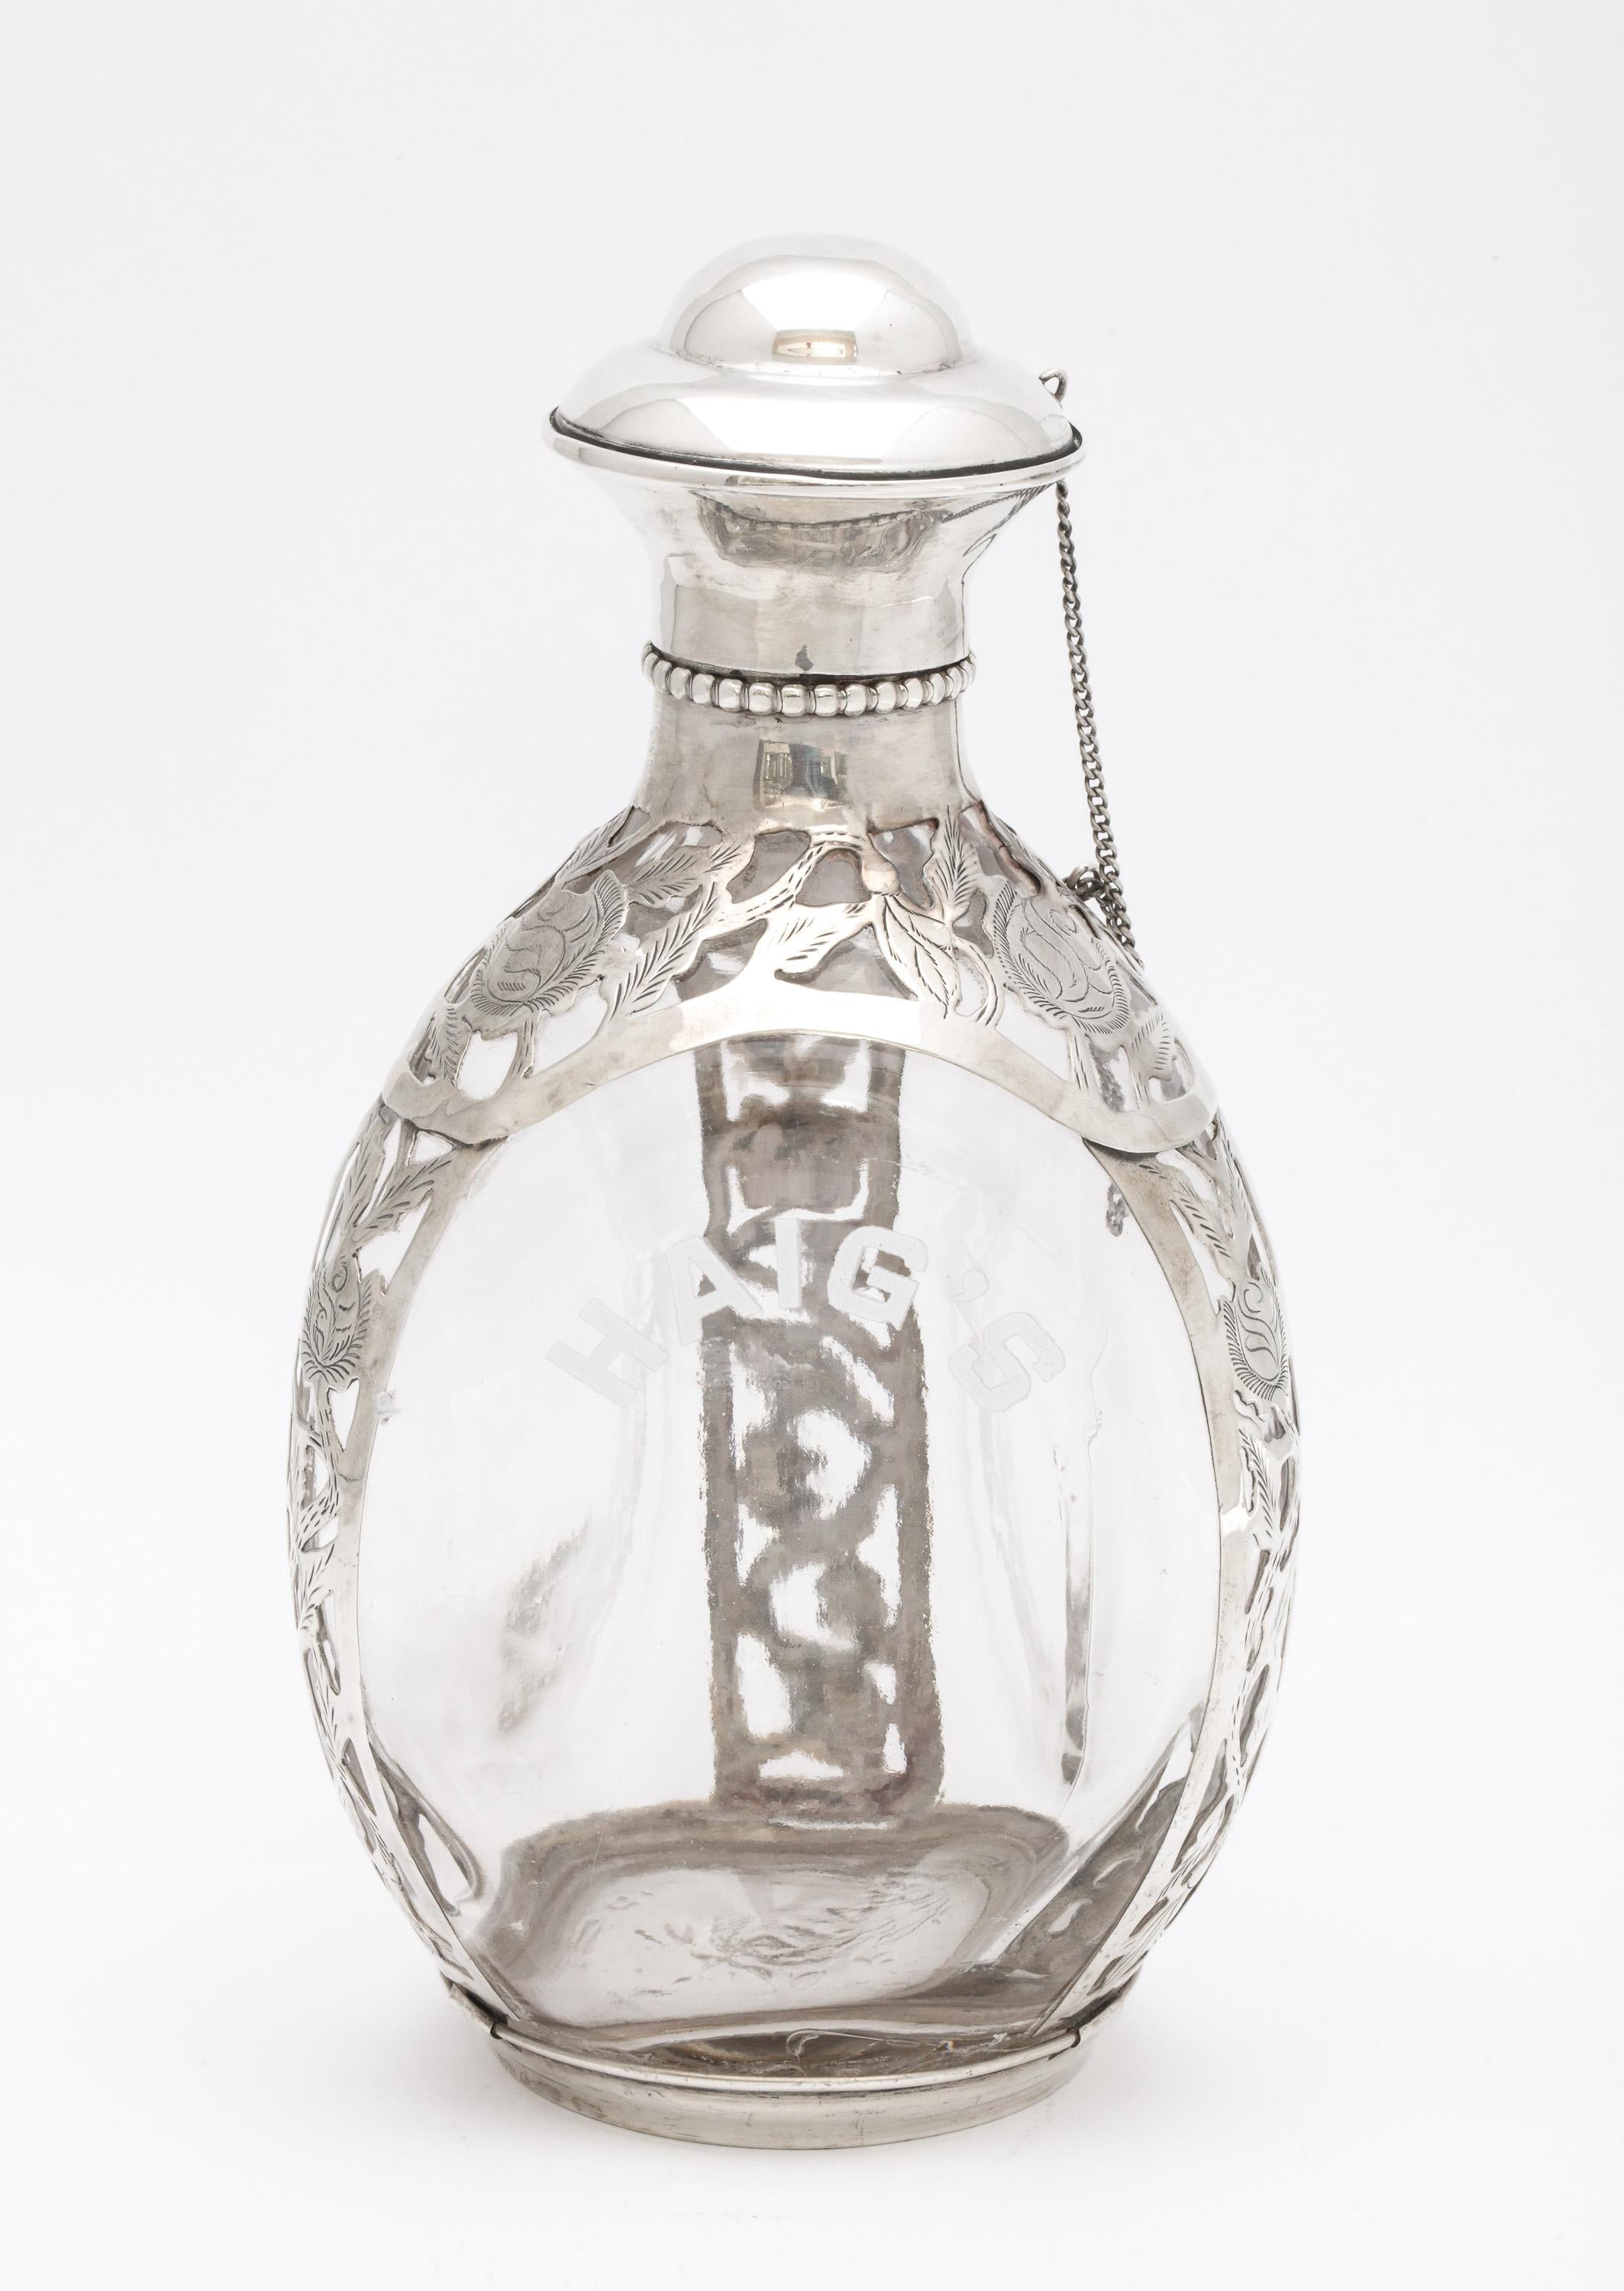 Mid-Century Modern, sterling silver floral overlay - mounted glass Haig's Scotch decanter, Mexico, Ca. 1955. Decanter is hand blown glass, signed with the Haig's mark. Sterling silver has a Mexican hallmark. The company name, Haig's, is enameled on